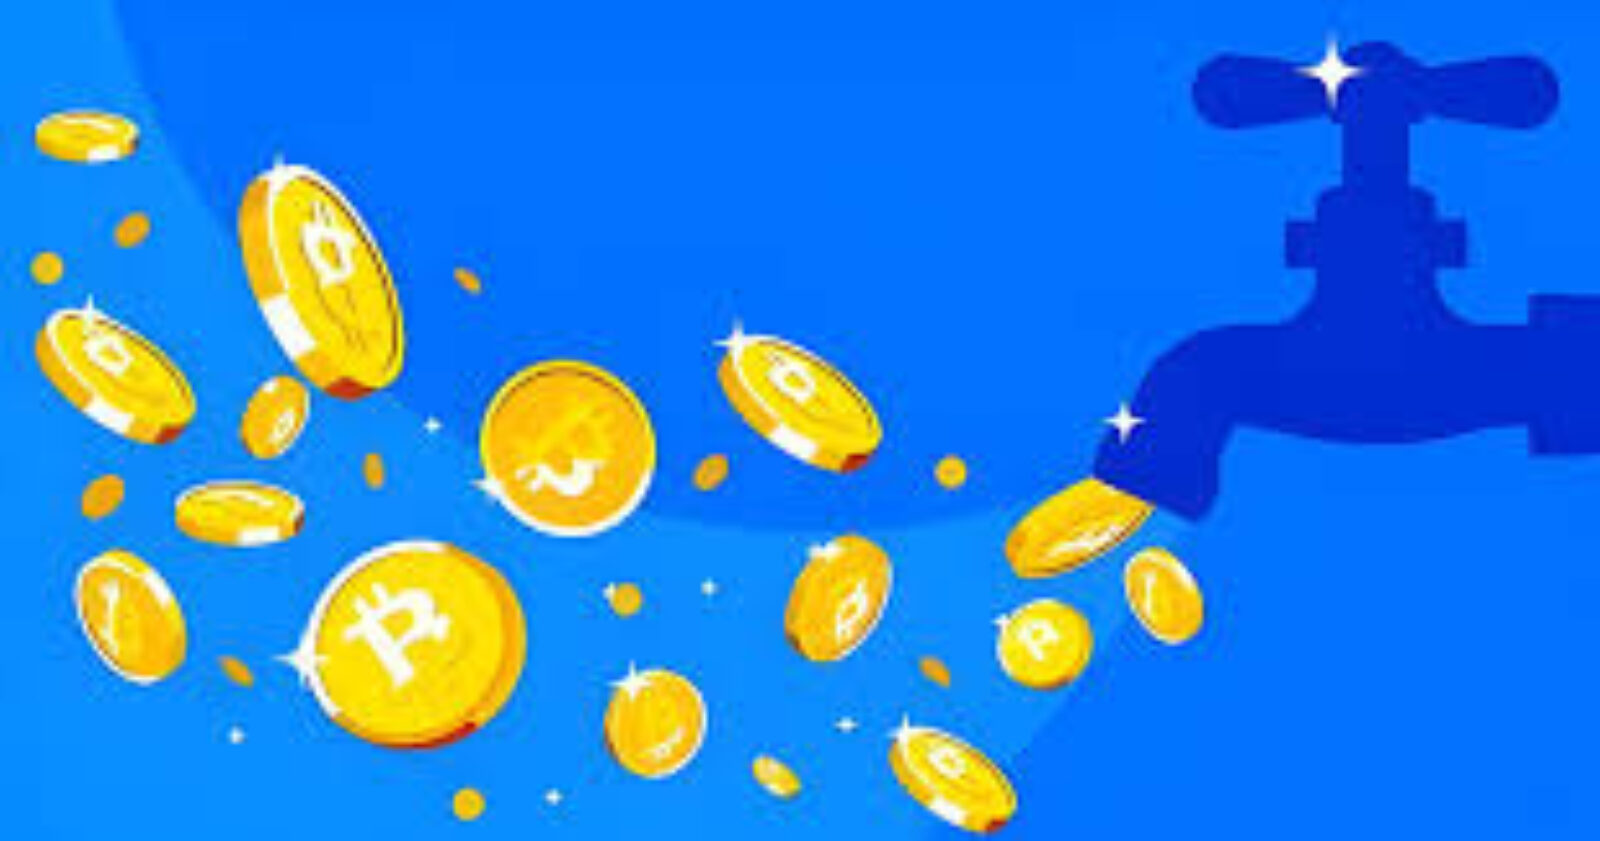 Dripping Coins: How Bitcoin Faucets Provide Free Crypto